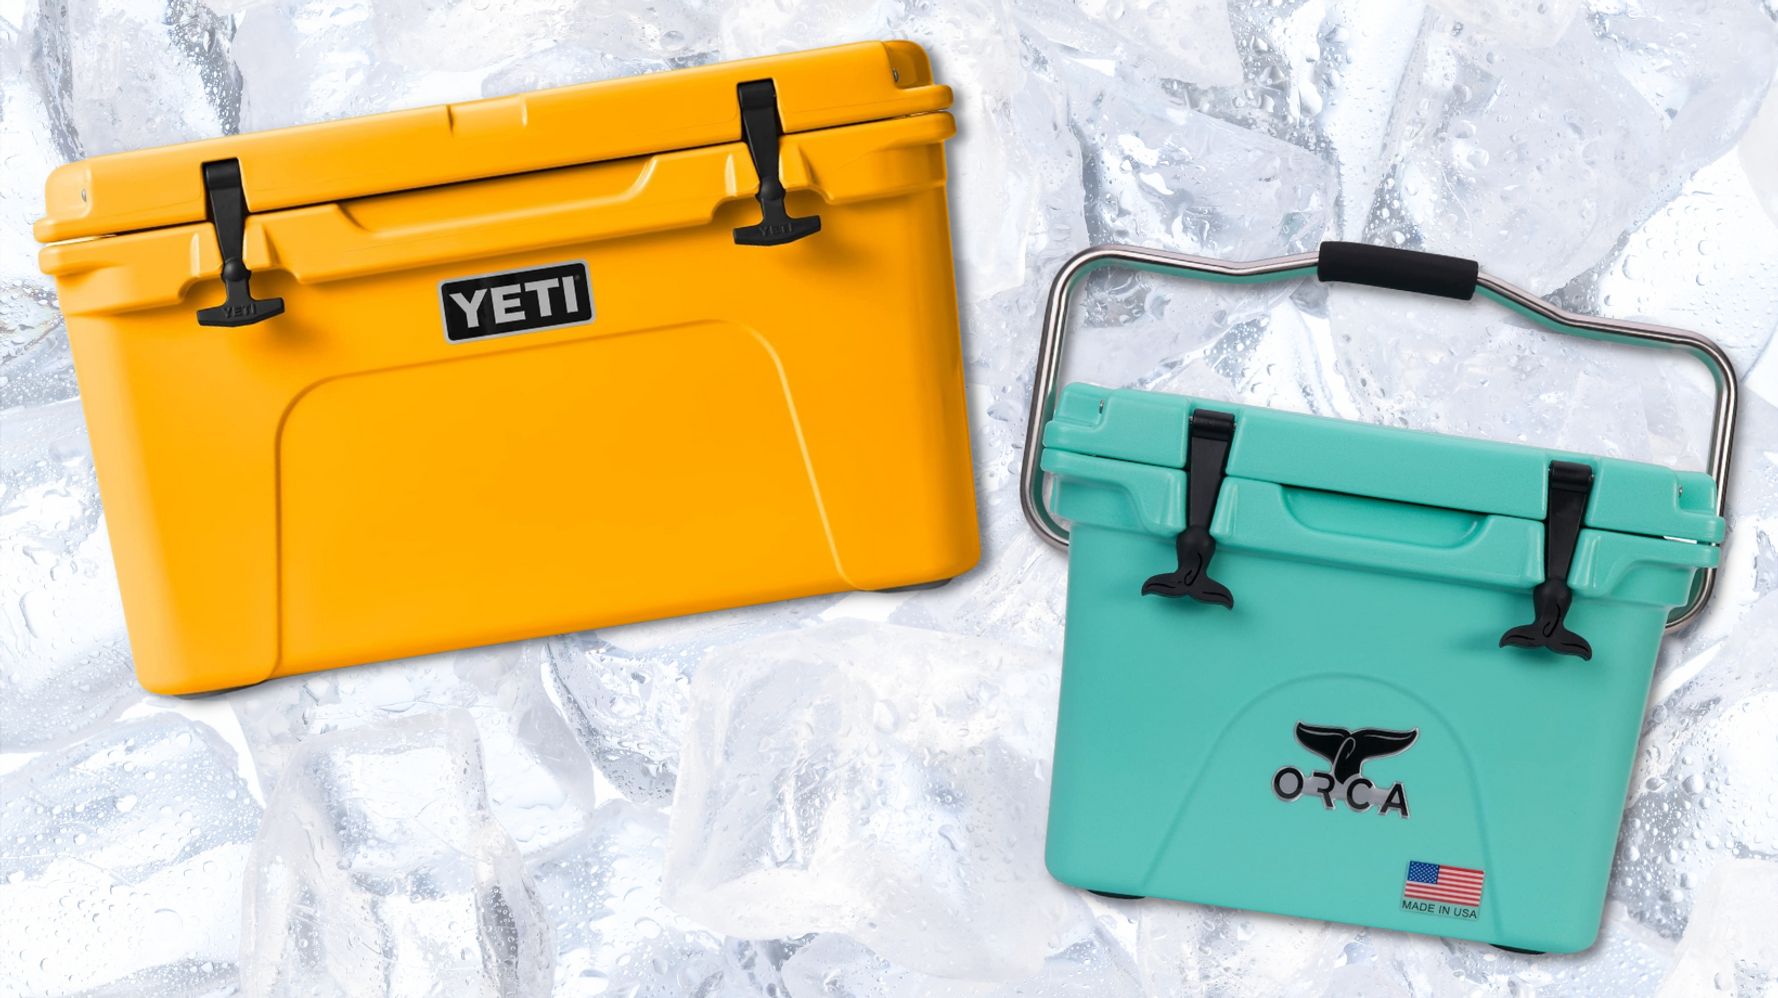 This YETI Cooler Bag Is a Favorite Accessory Among Celebrities